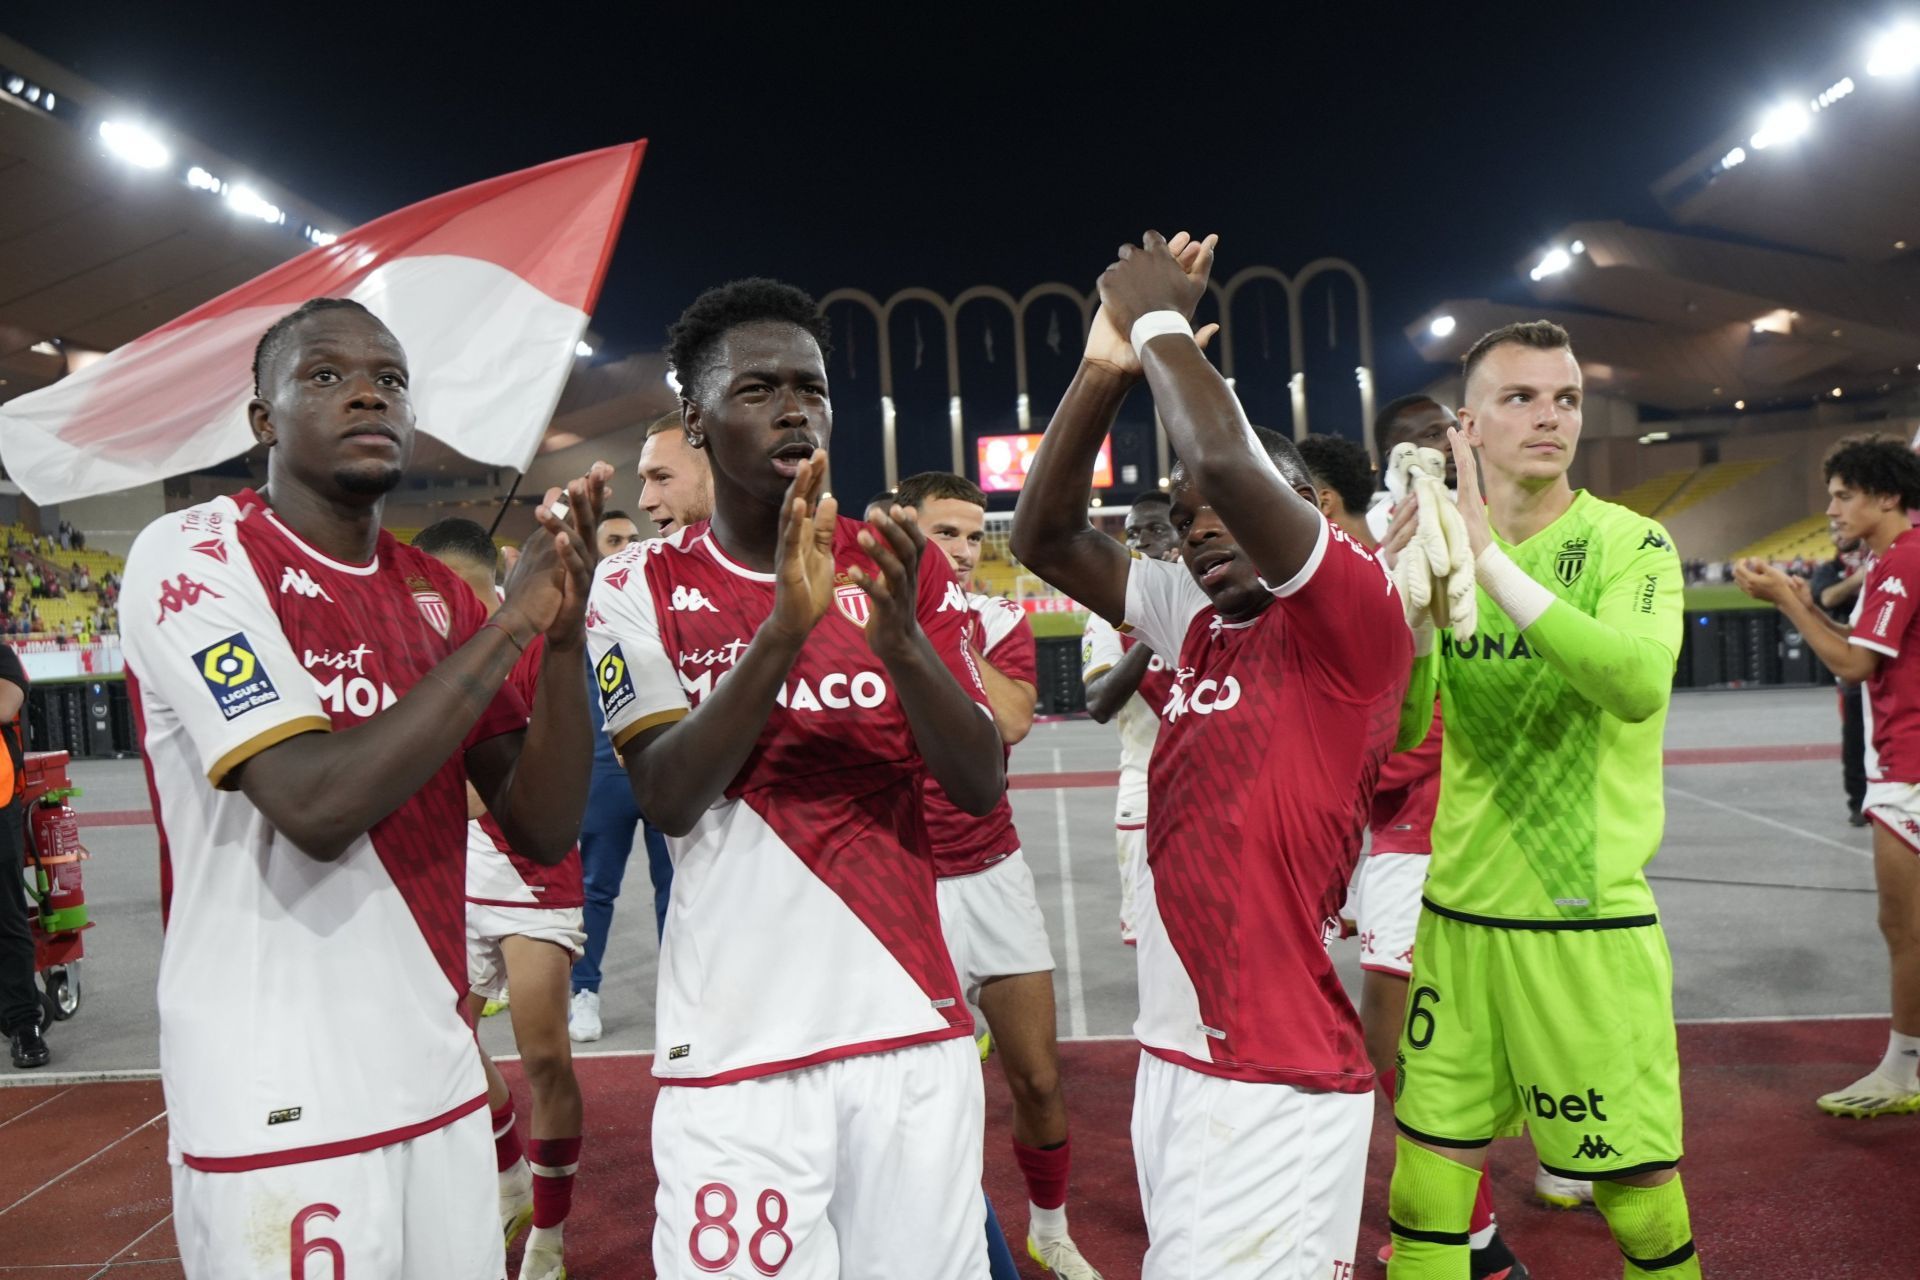 Reims and Monaco go head-to-head in the Ligue 1 on Saturday